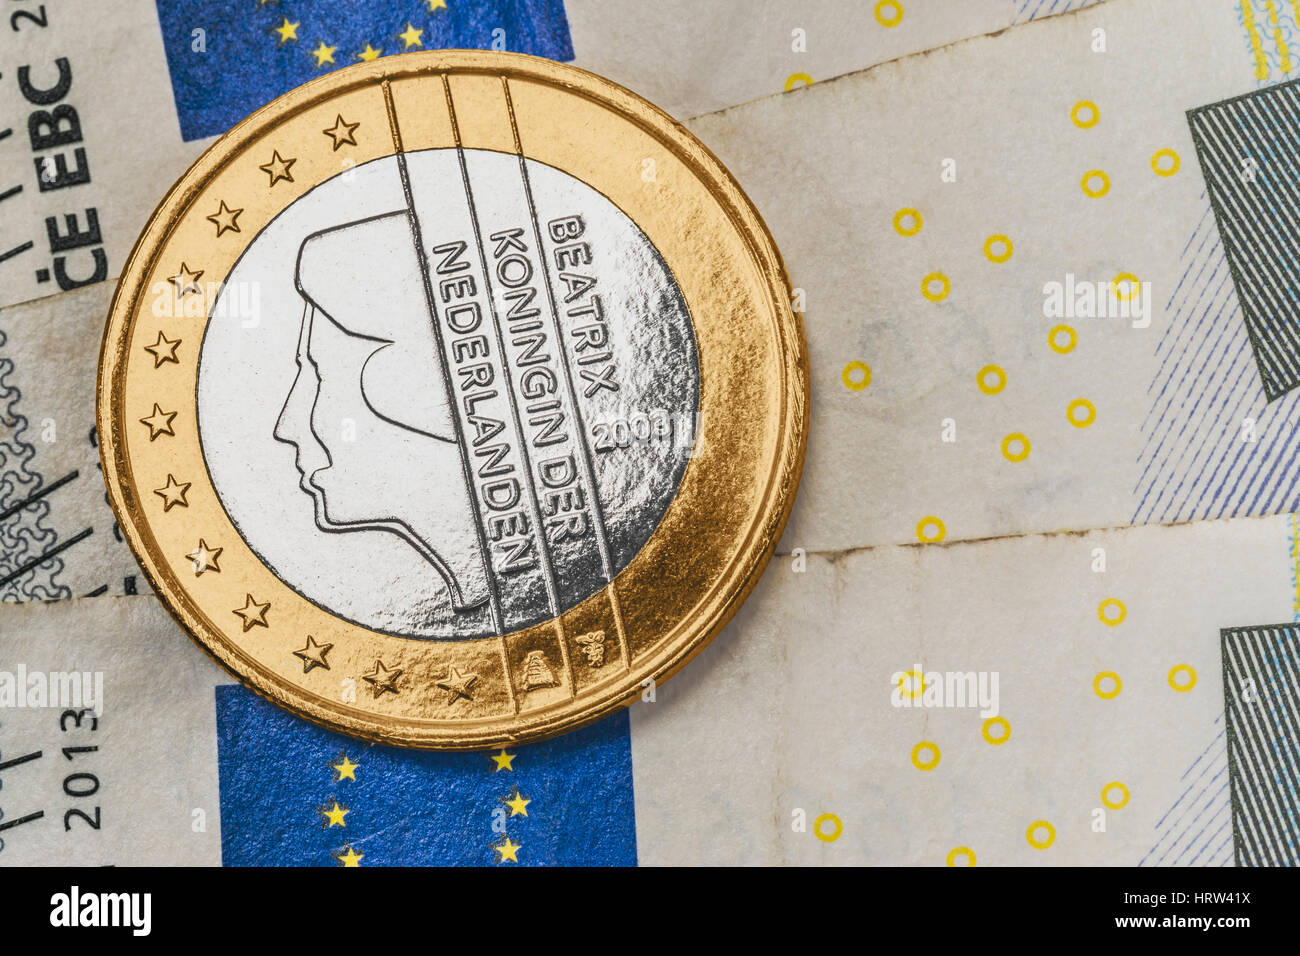 a 1 euro coin from the Netherlands on euro banknotes Stock Photo